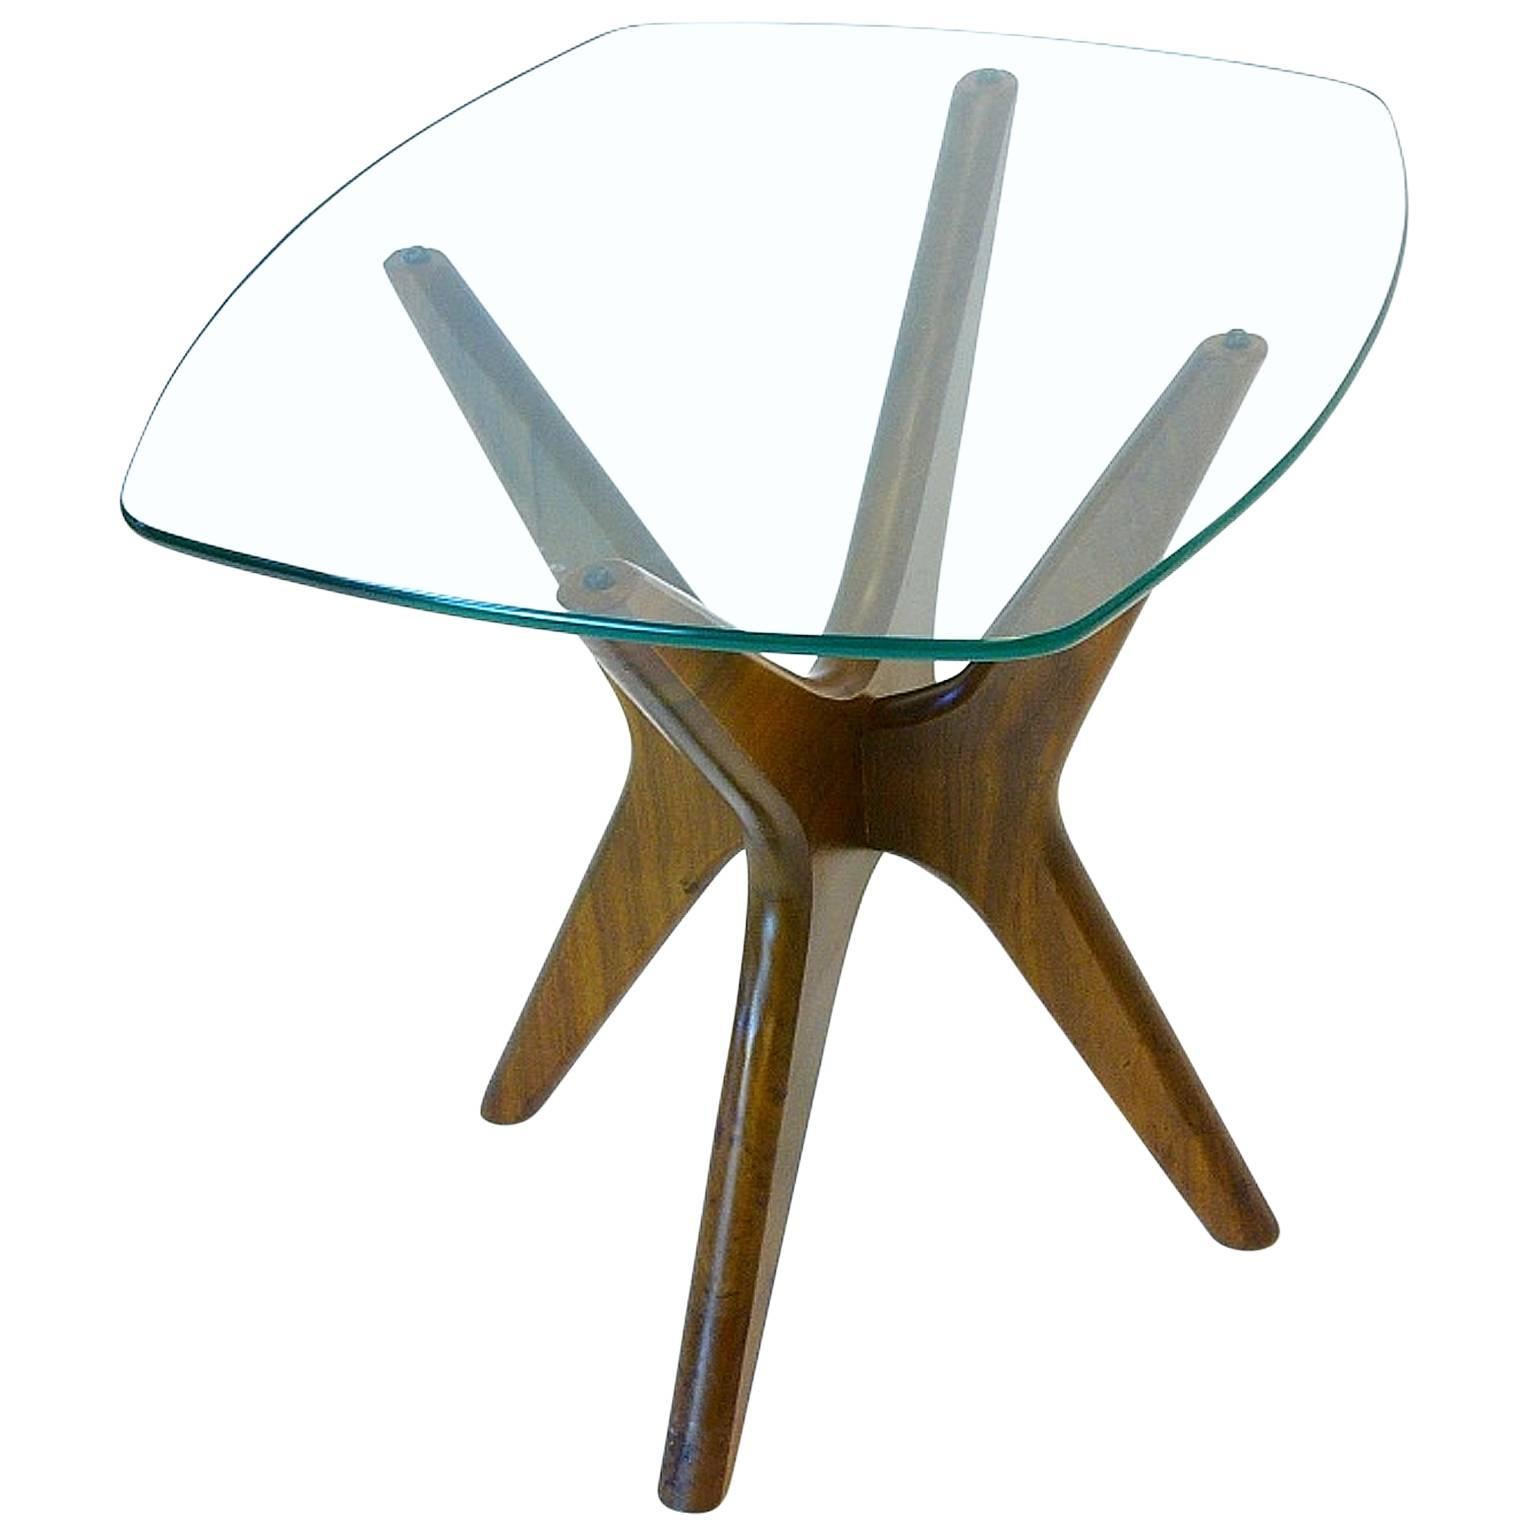 Sculptural "Jax" End Table by Adrian Pearsall for Craft Associates